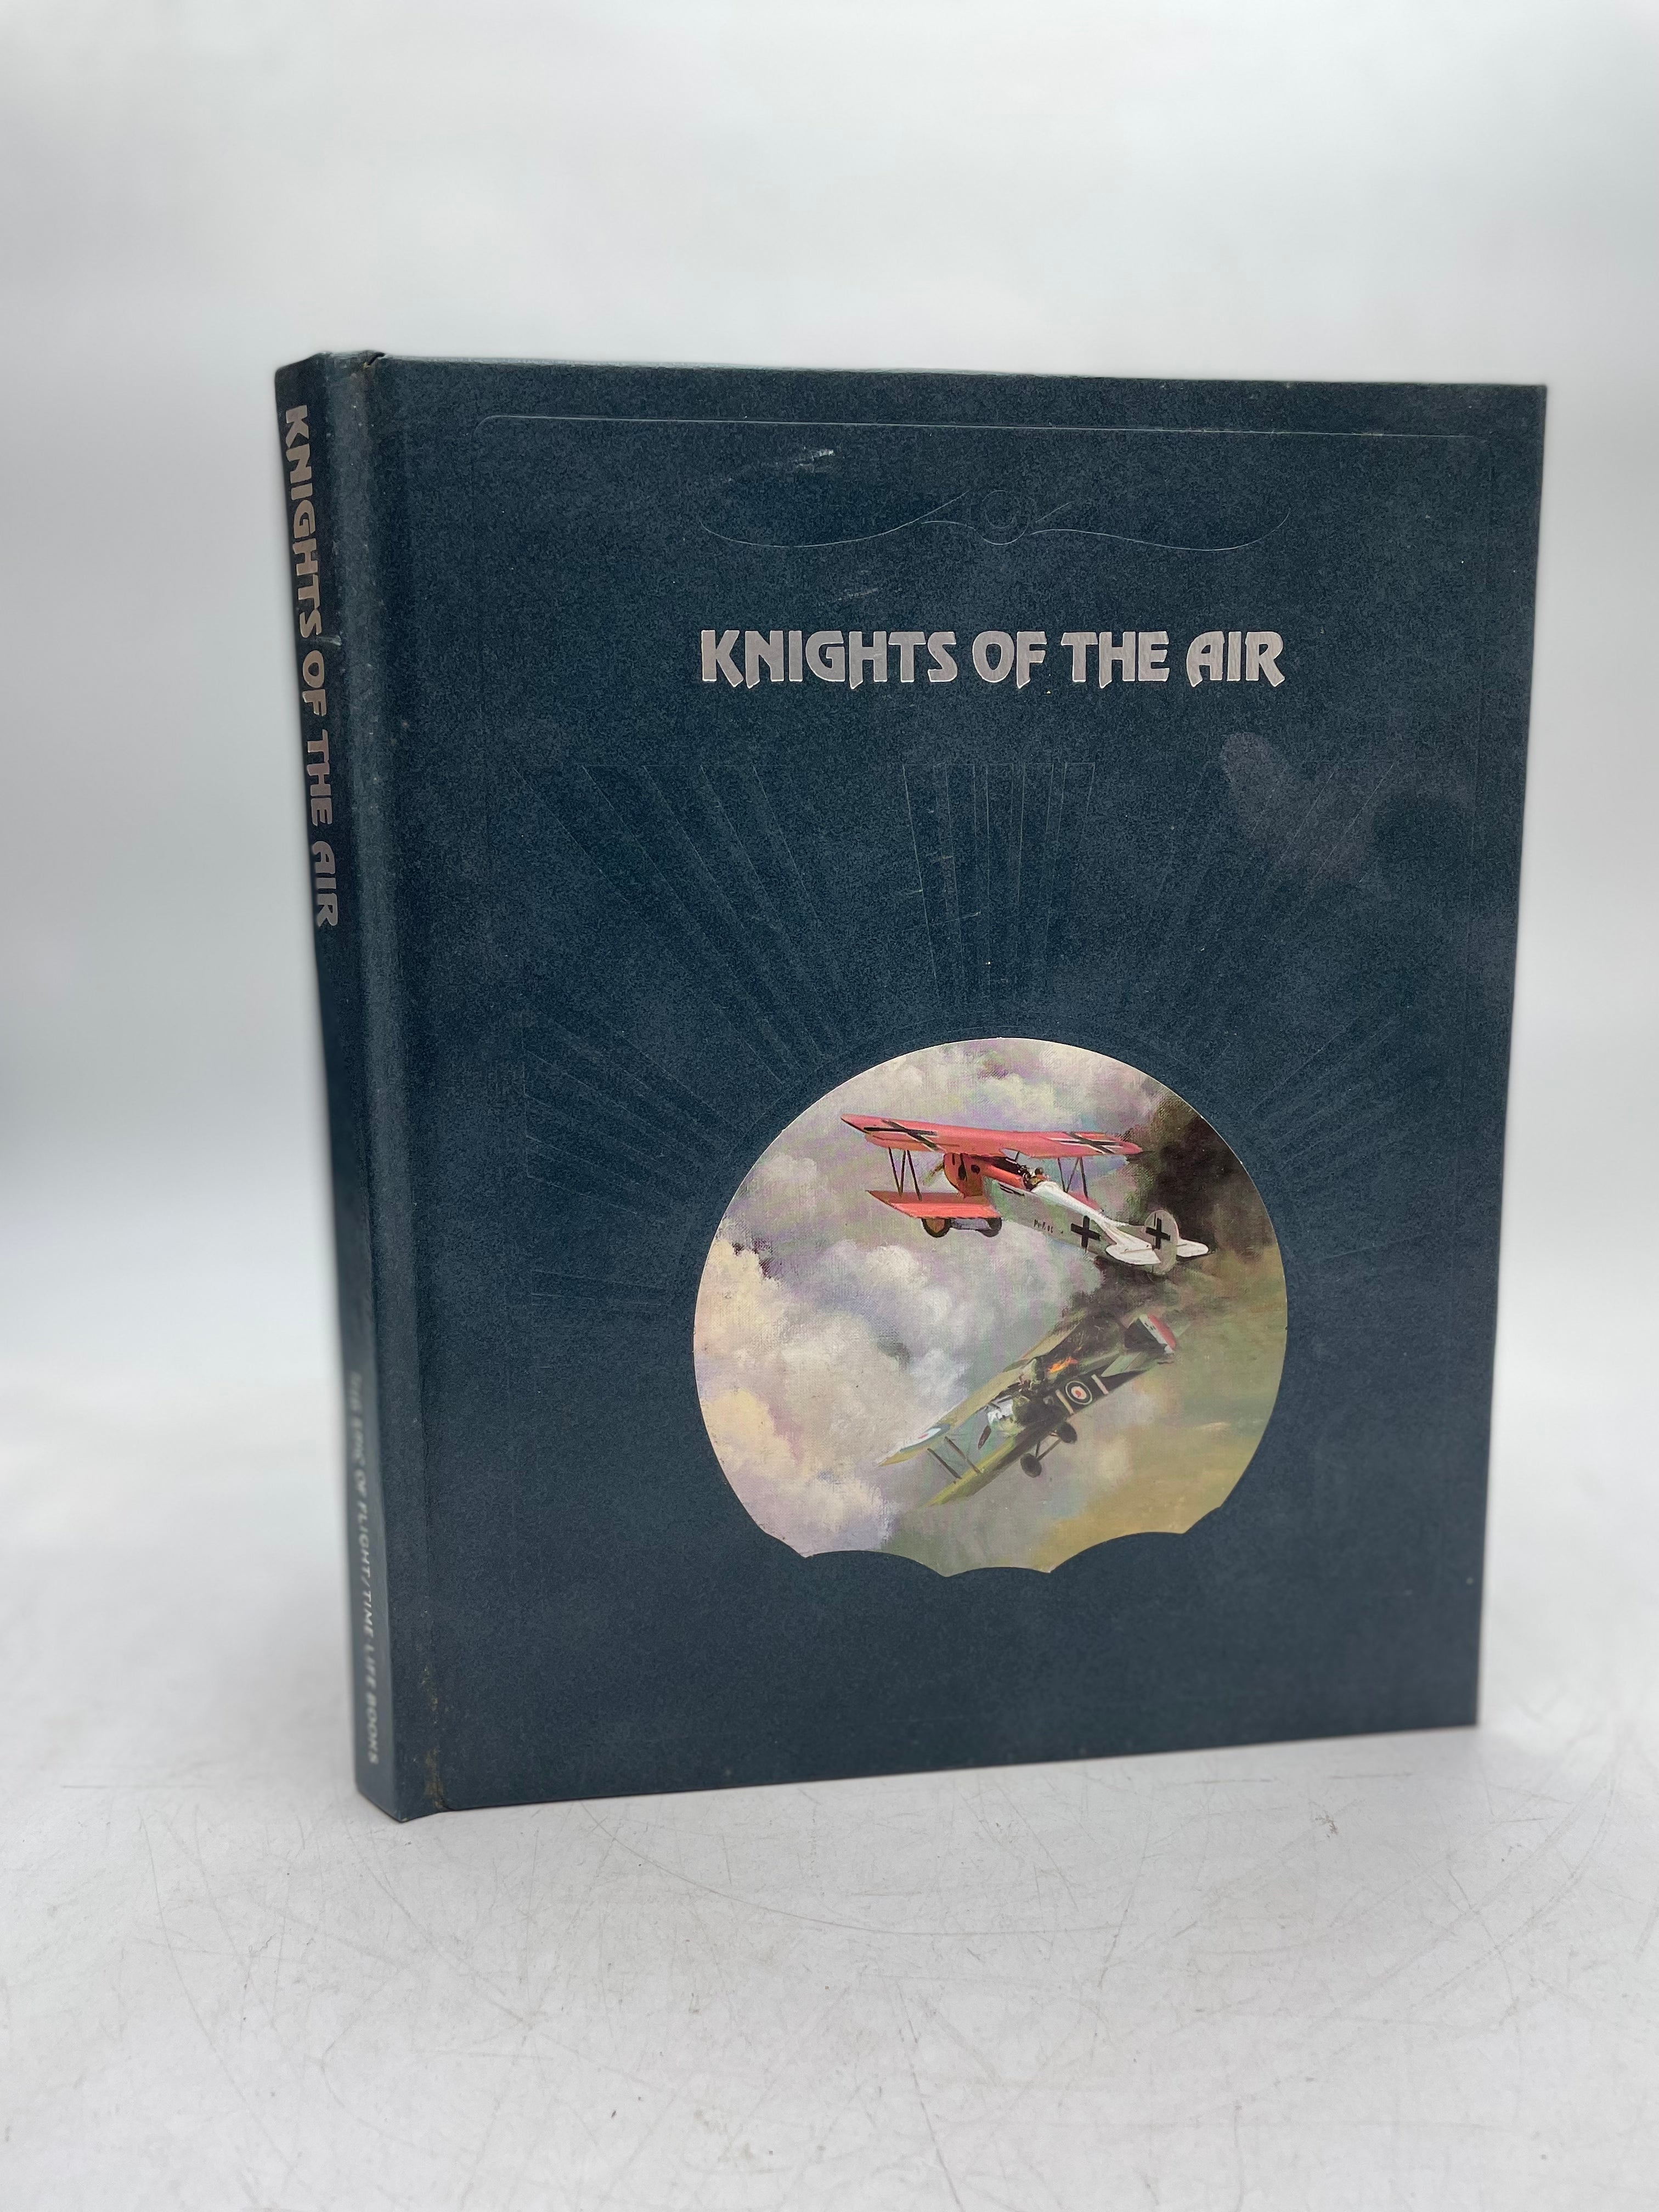 Knights of the Air The Epic of Flight" by Ezra Brown